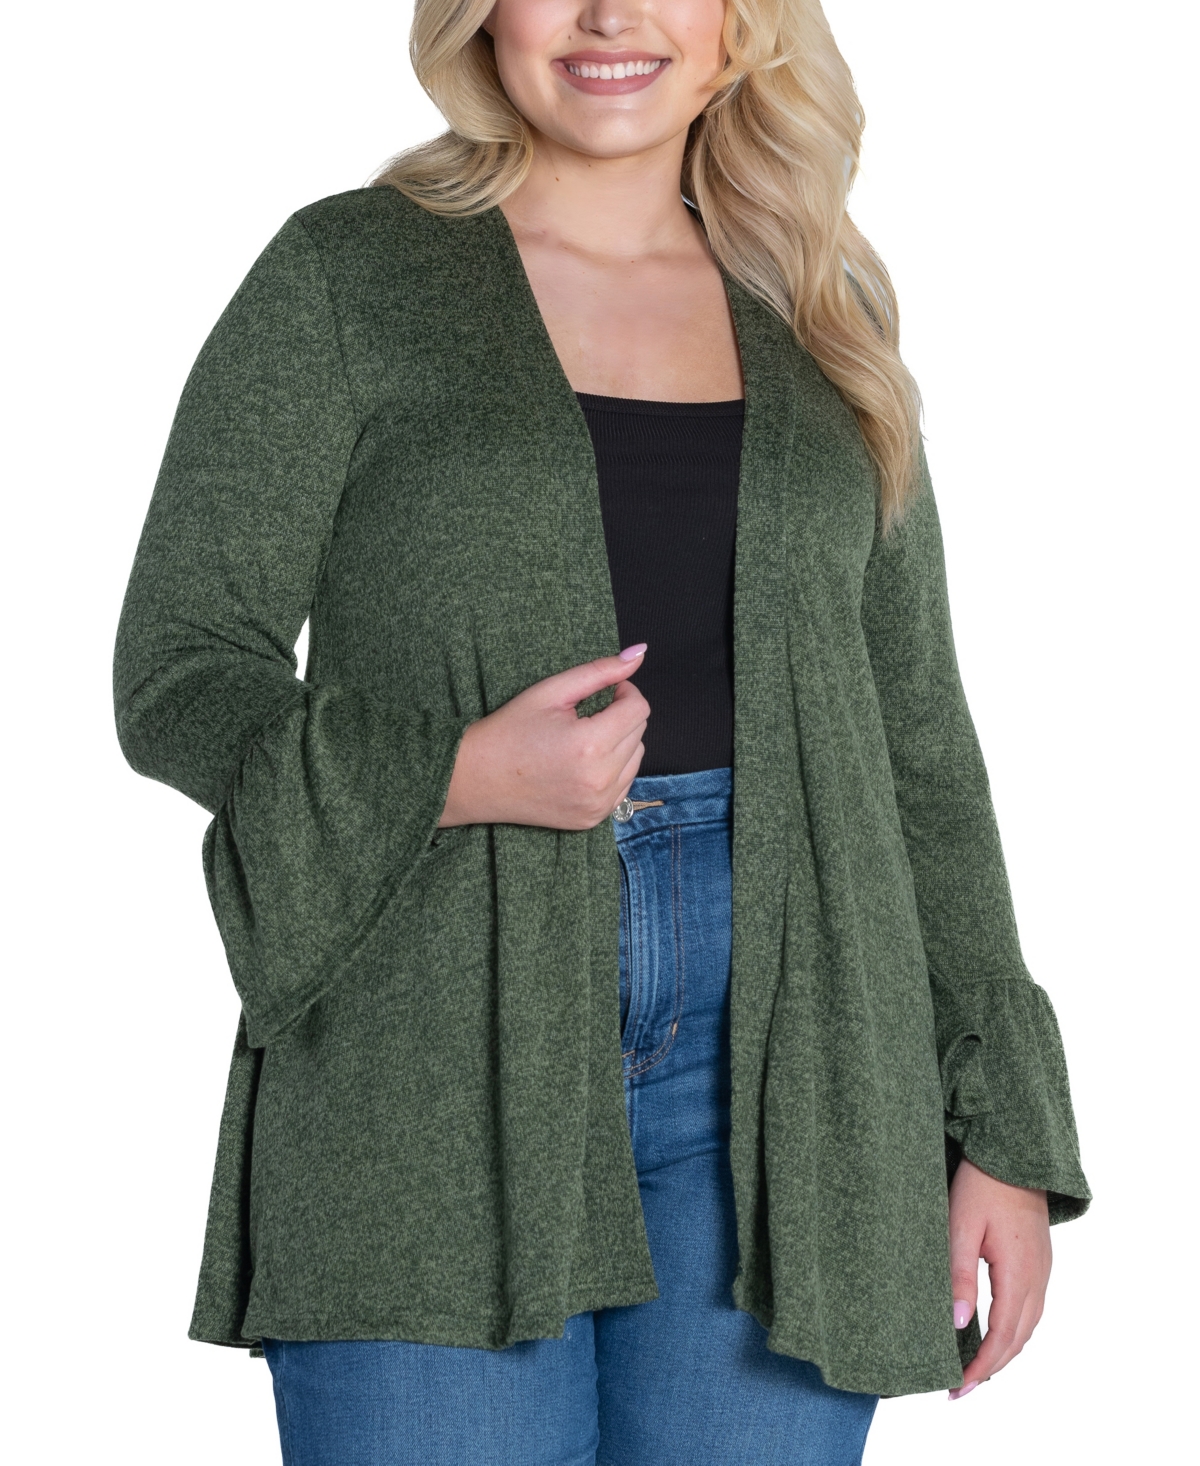 24seven Comfort Apparel Plus Size Bell Sleeve Open Cardigan Sweater In Olive